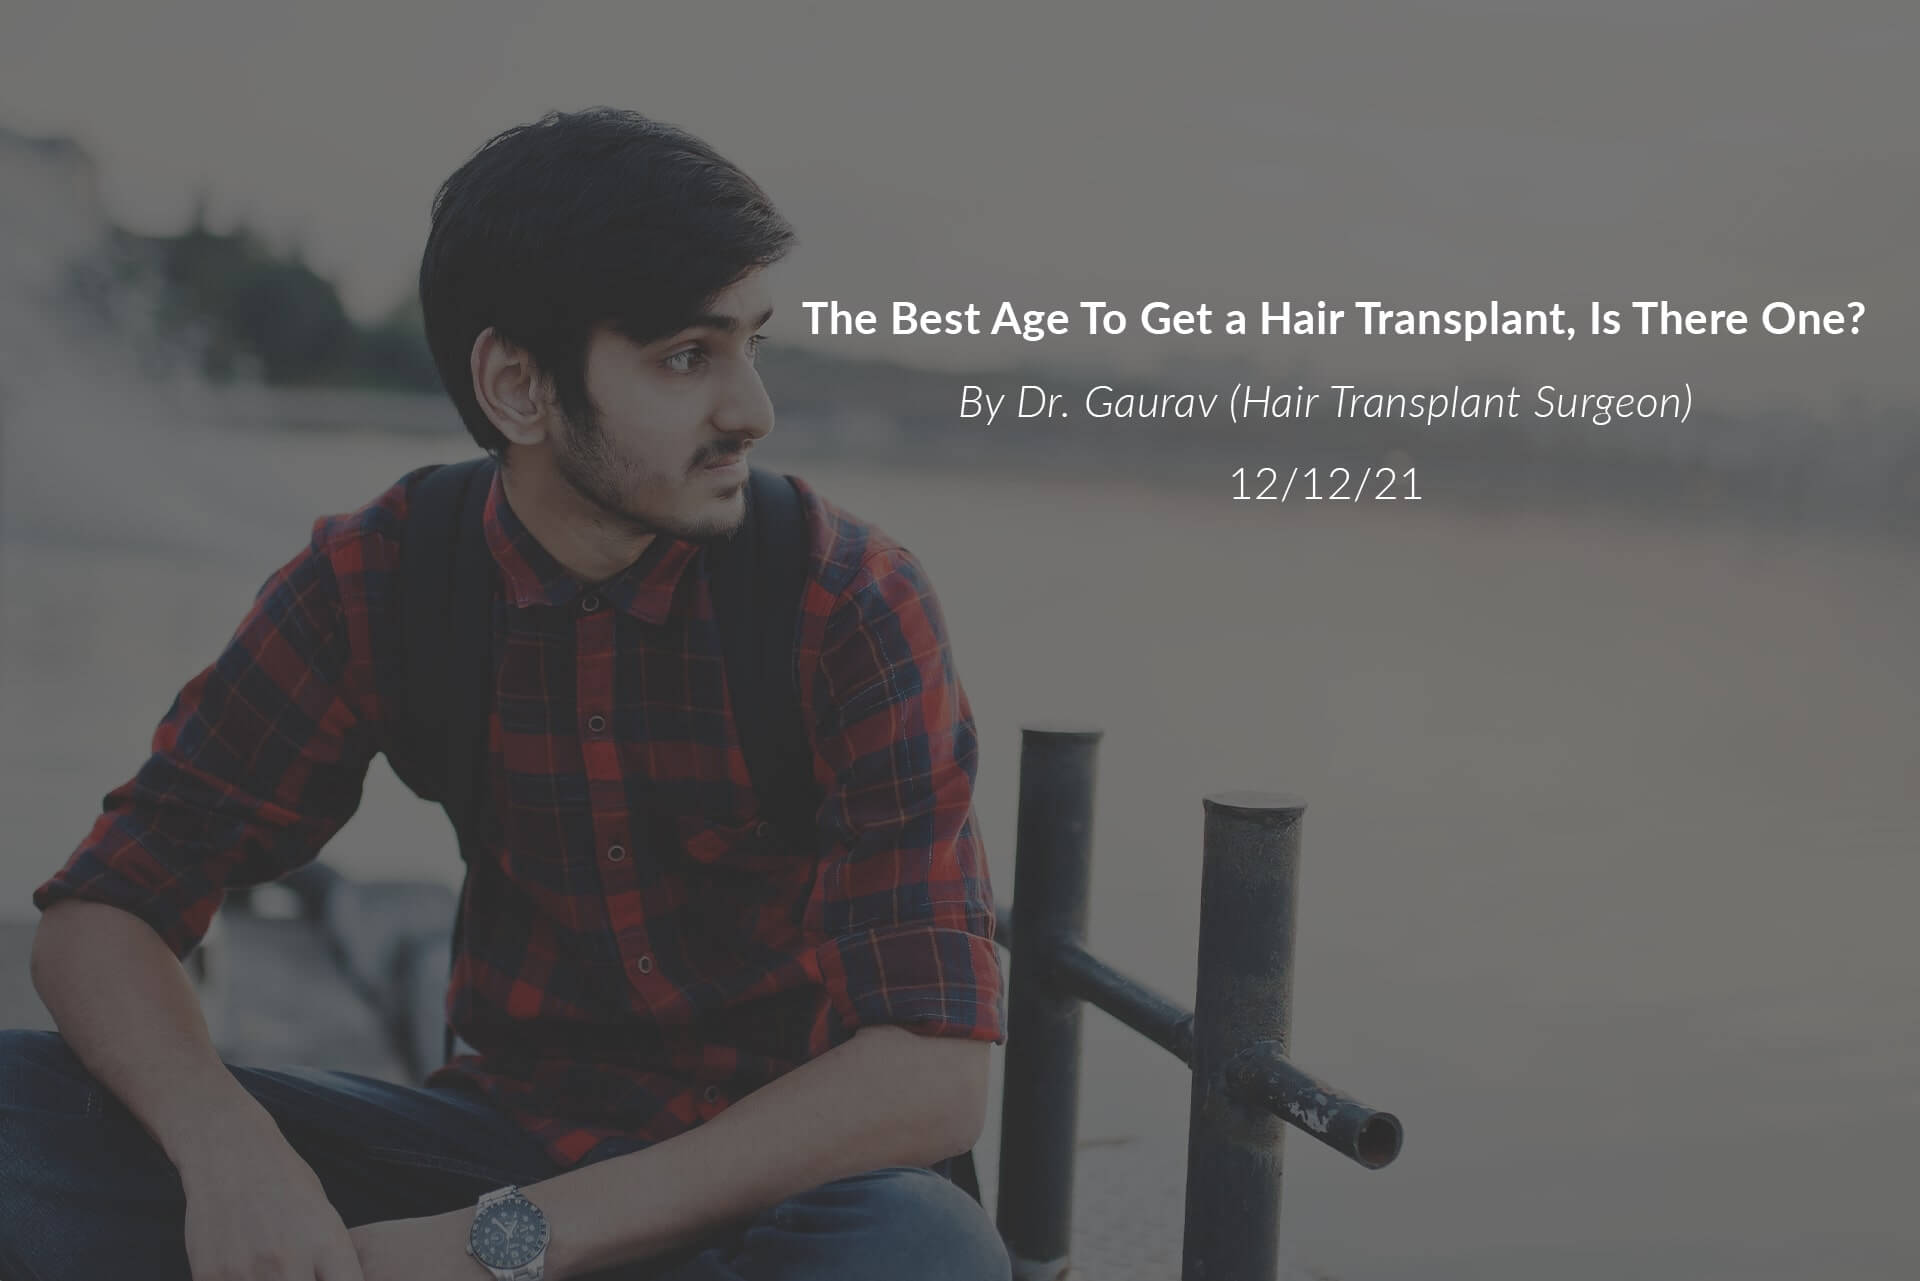 The Best Age to Get a Hair Transplant, Is There One?